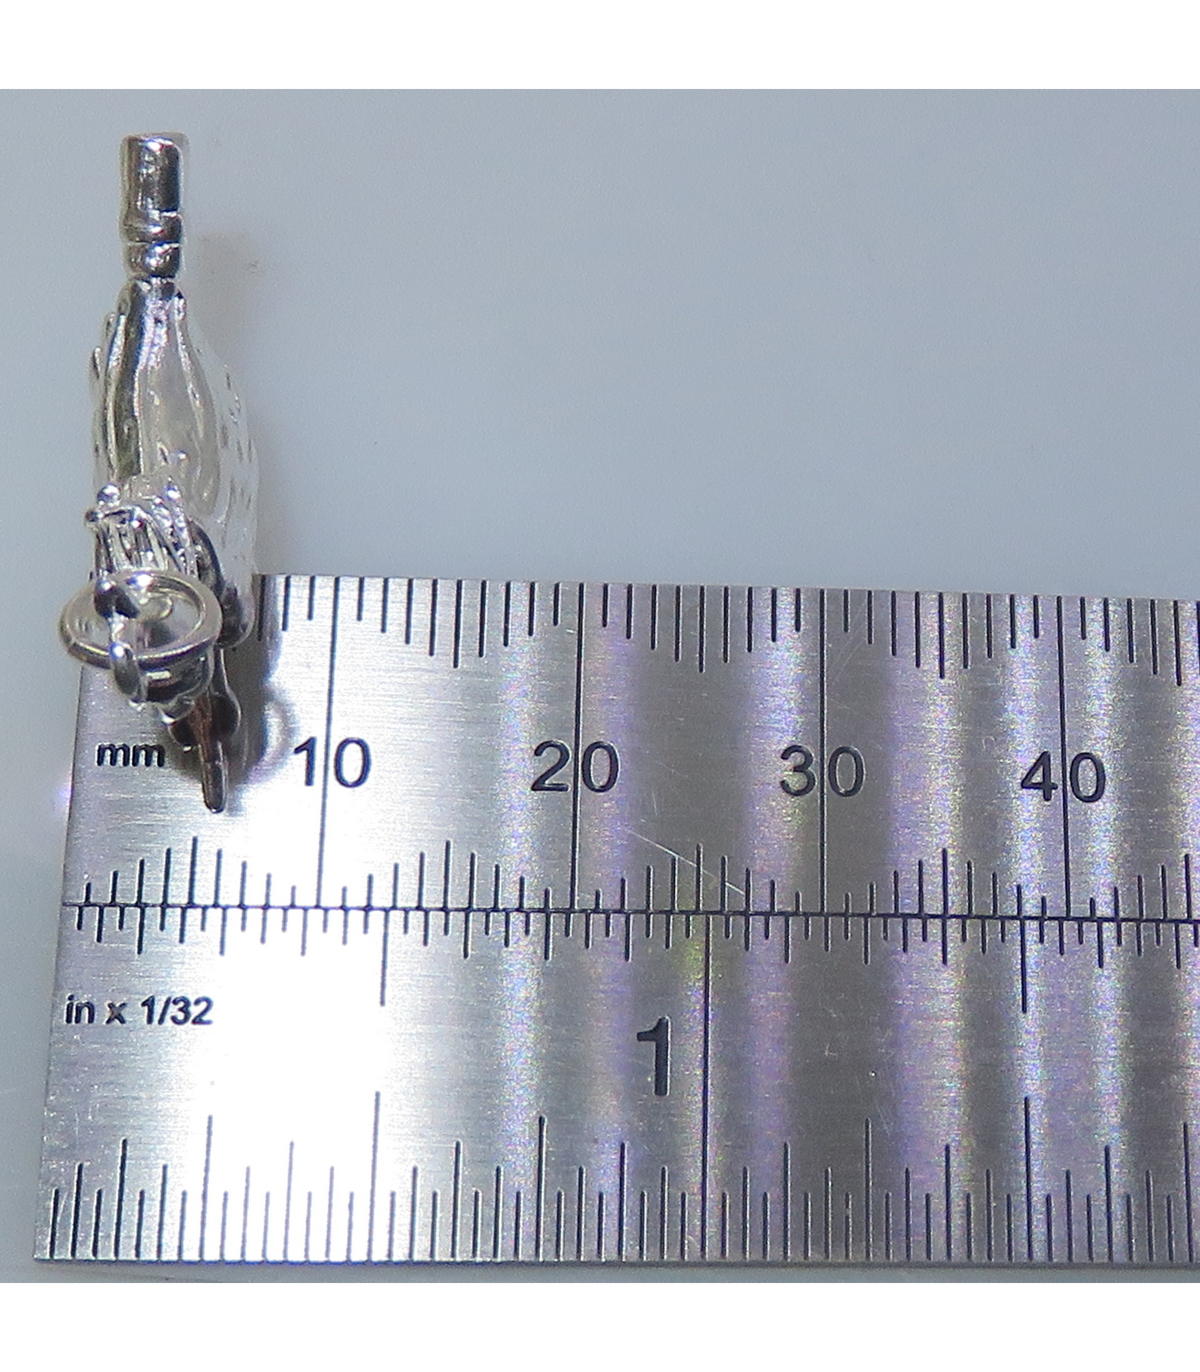 Sterling Silver Witch Charm - Halloween Charms